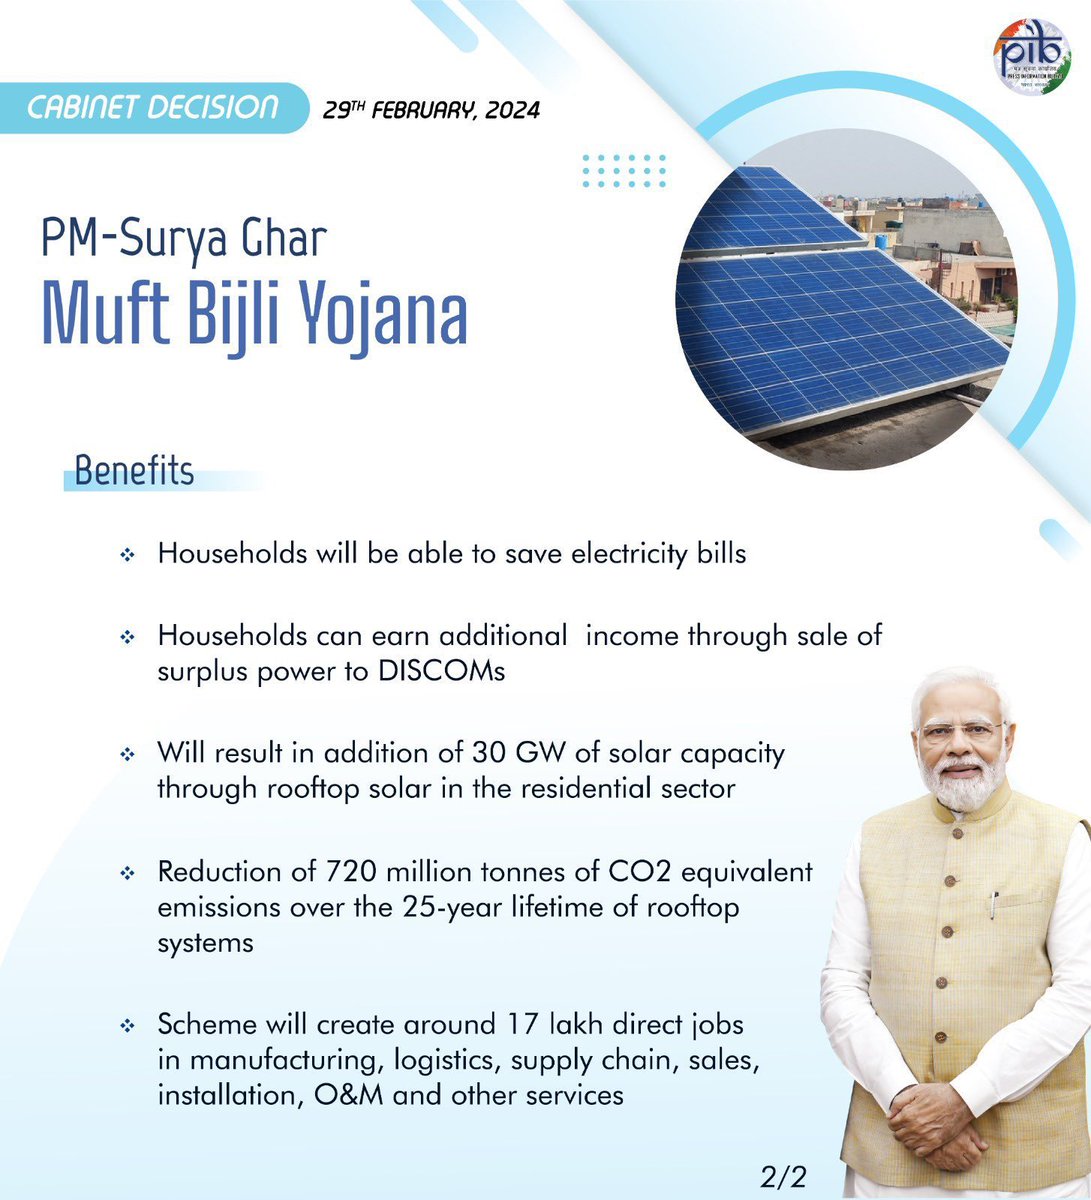 PM-Surya Ghar: Muft Bijli Yojana, which has been approved by the Cabinet, is going to be a game changer for bringing sustainable energy solutions to every home. Harnessing solar power, this initiative promises to light up lives without burdening, ensuring a greener future.